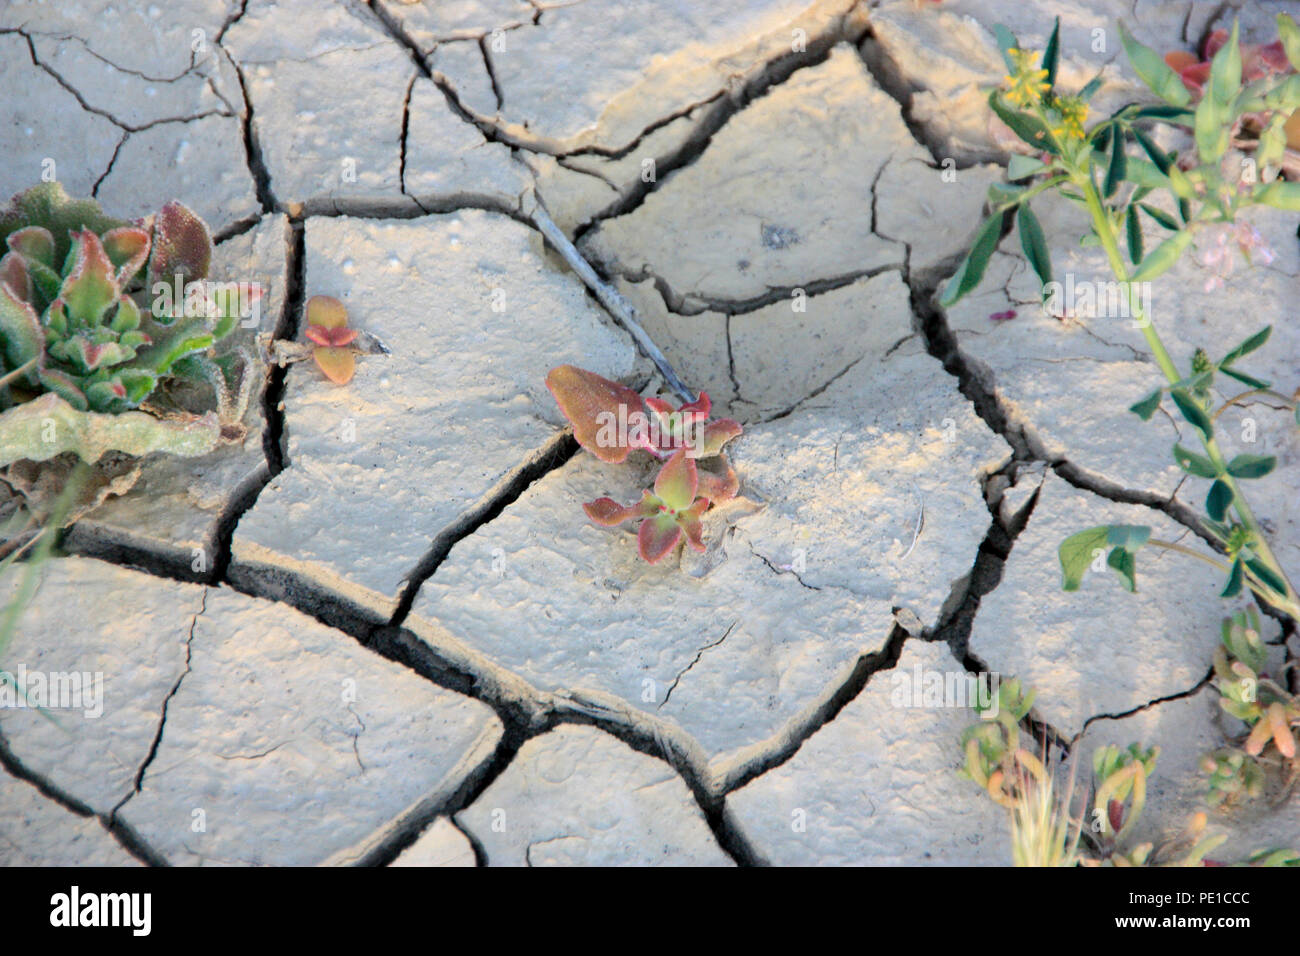 Dry and cracked soil at the Black's Beach near Torrey Pines and La Jolla in San Diego, Kalifornia, USA in 2013 Stock Photo